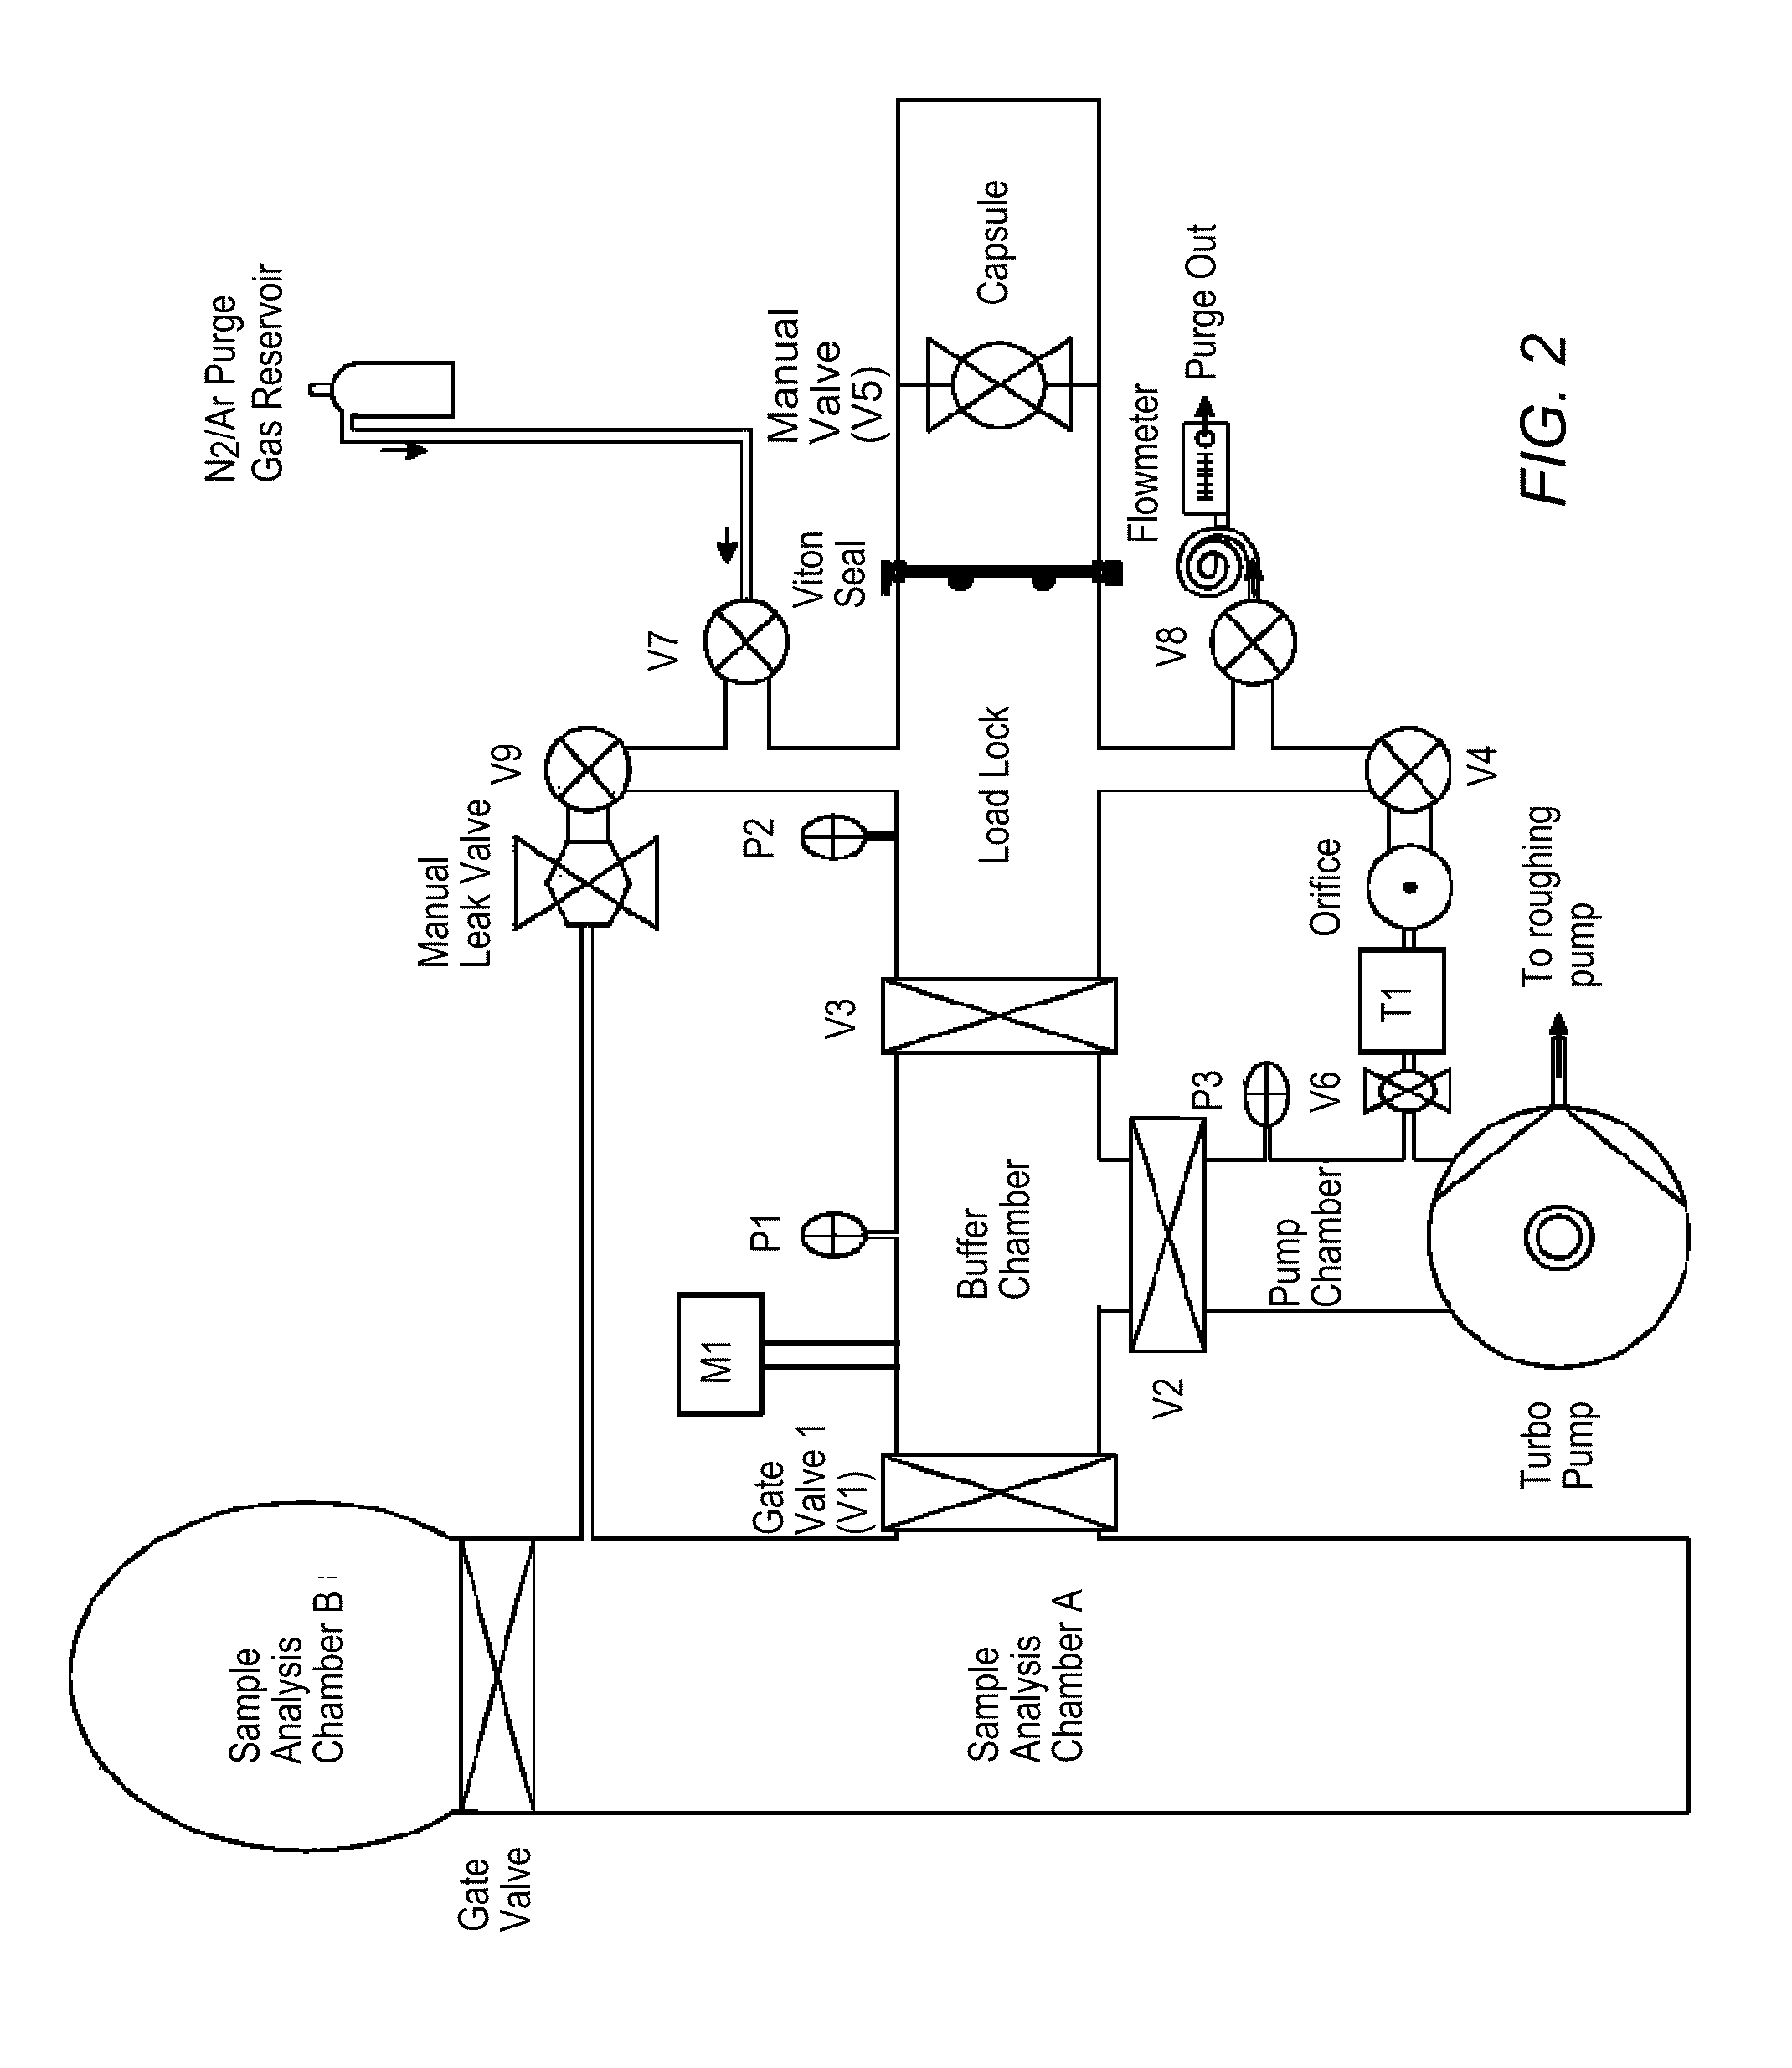 Interface designed with differential pumping and built-in figure of merit method to monitor chambers where environmentally sensitive samples are prepared and transferred for analysis